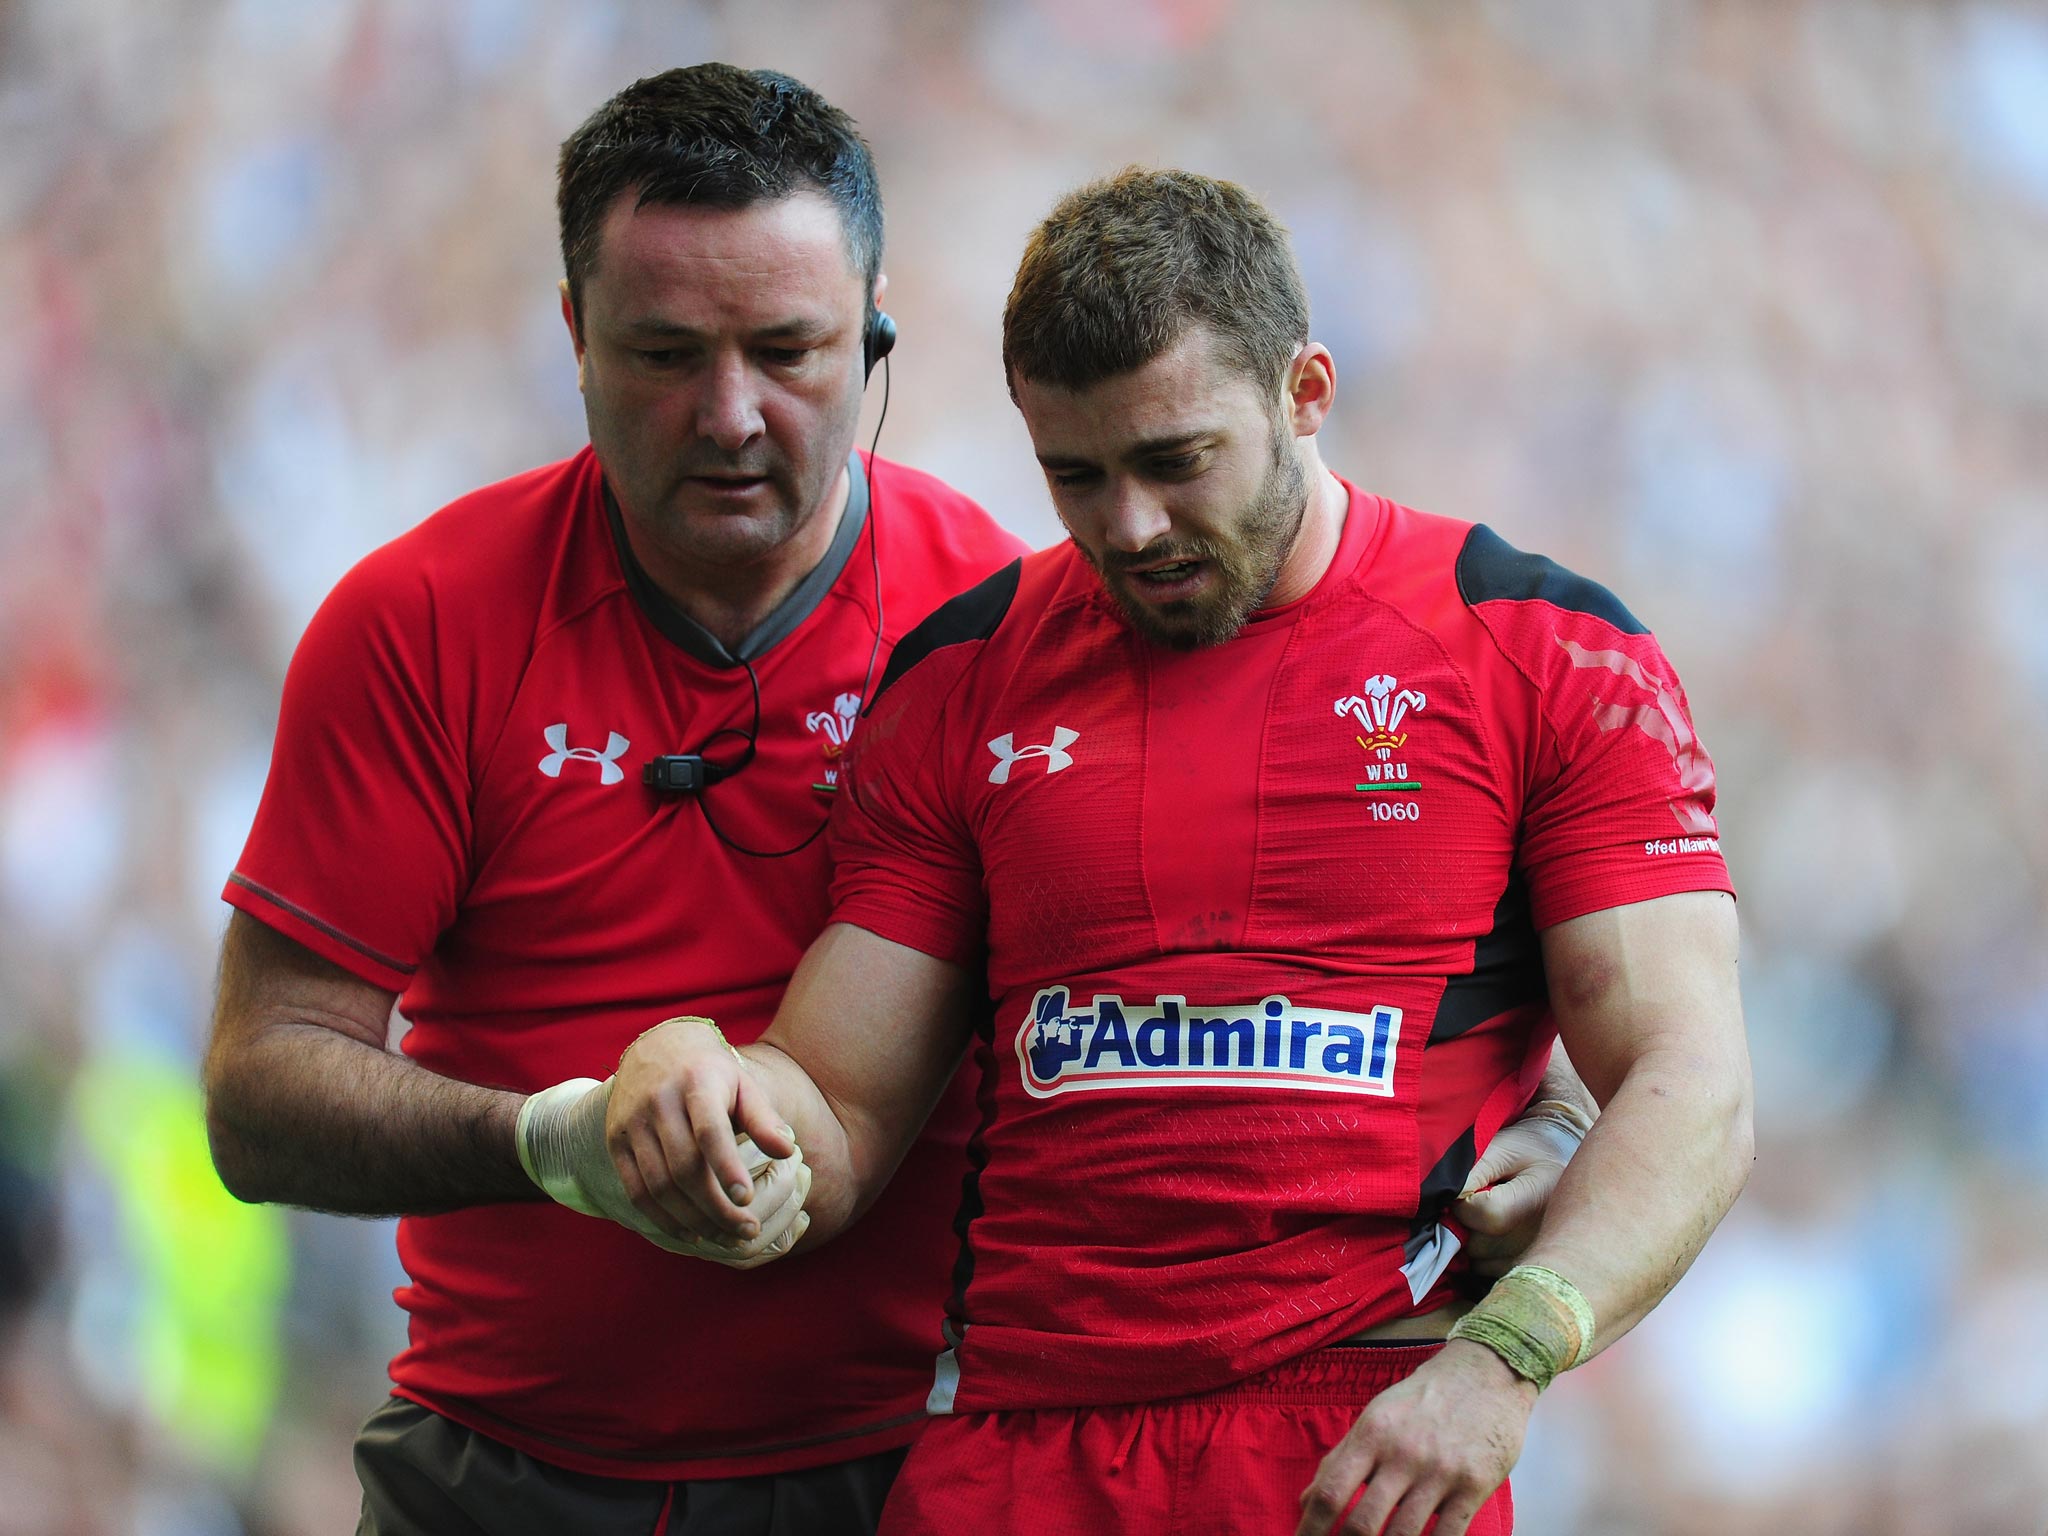 Leigh Halfpenny should make his belated Toulon debut next month